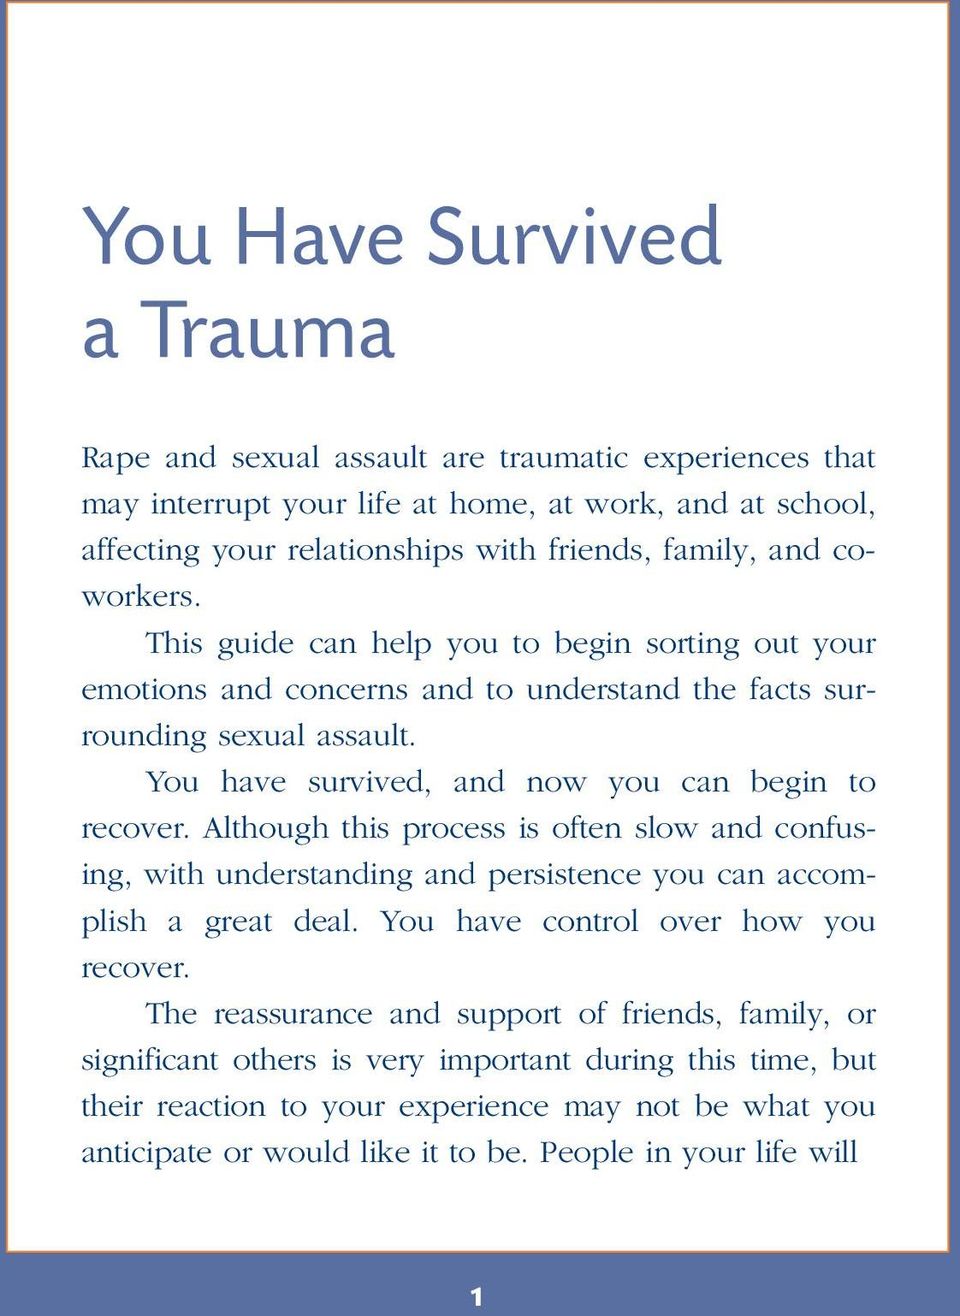 You have survived, and now you can begin to recover. Although this process is often slow and confusing, with understanding and persistence you can accomplish a great deal.